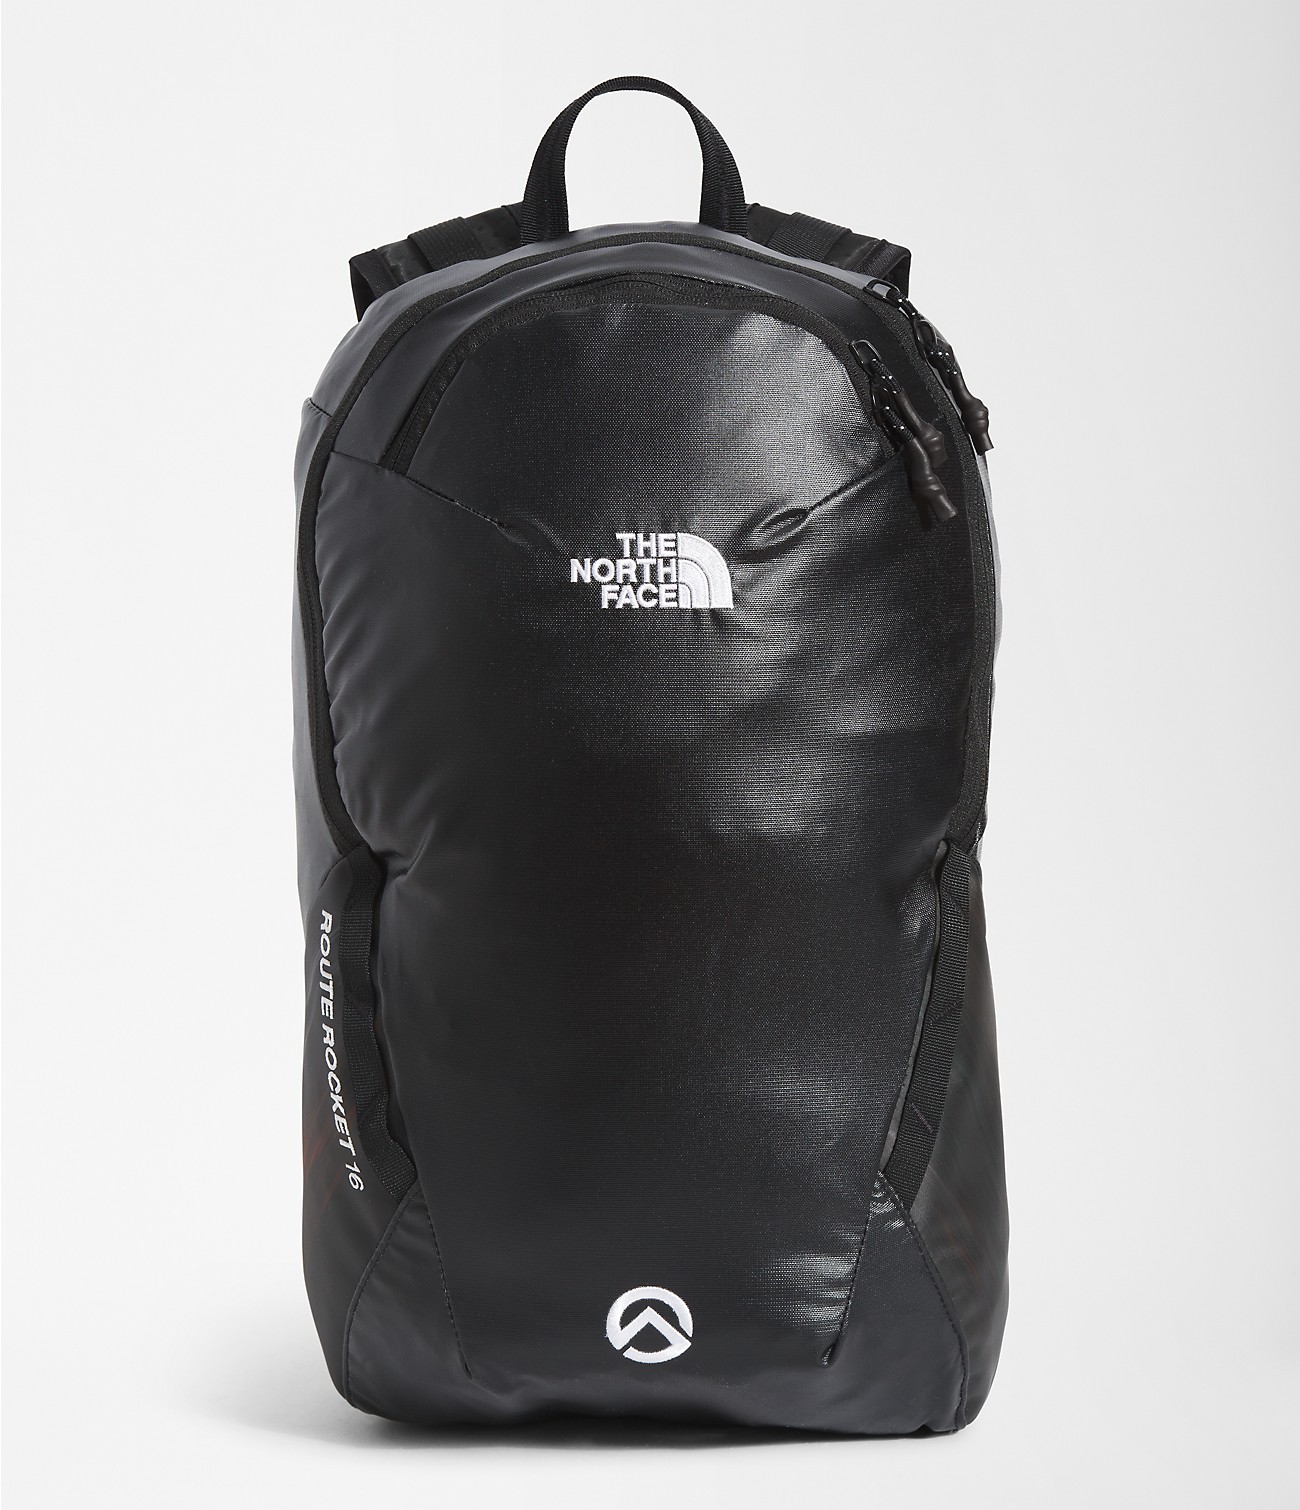 Route Rocket 16 Backpack